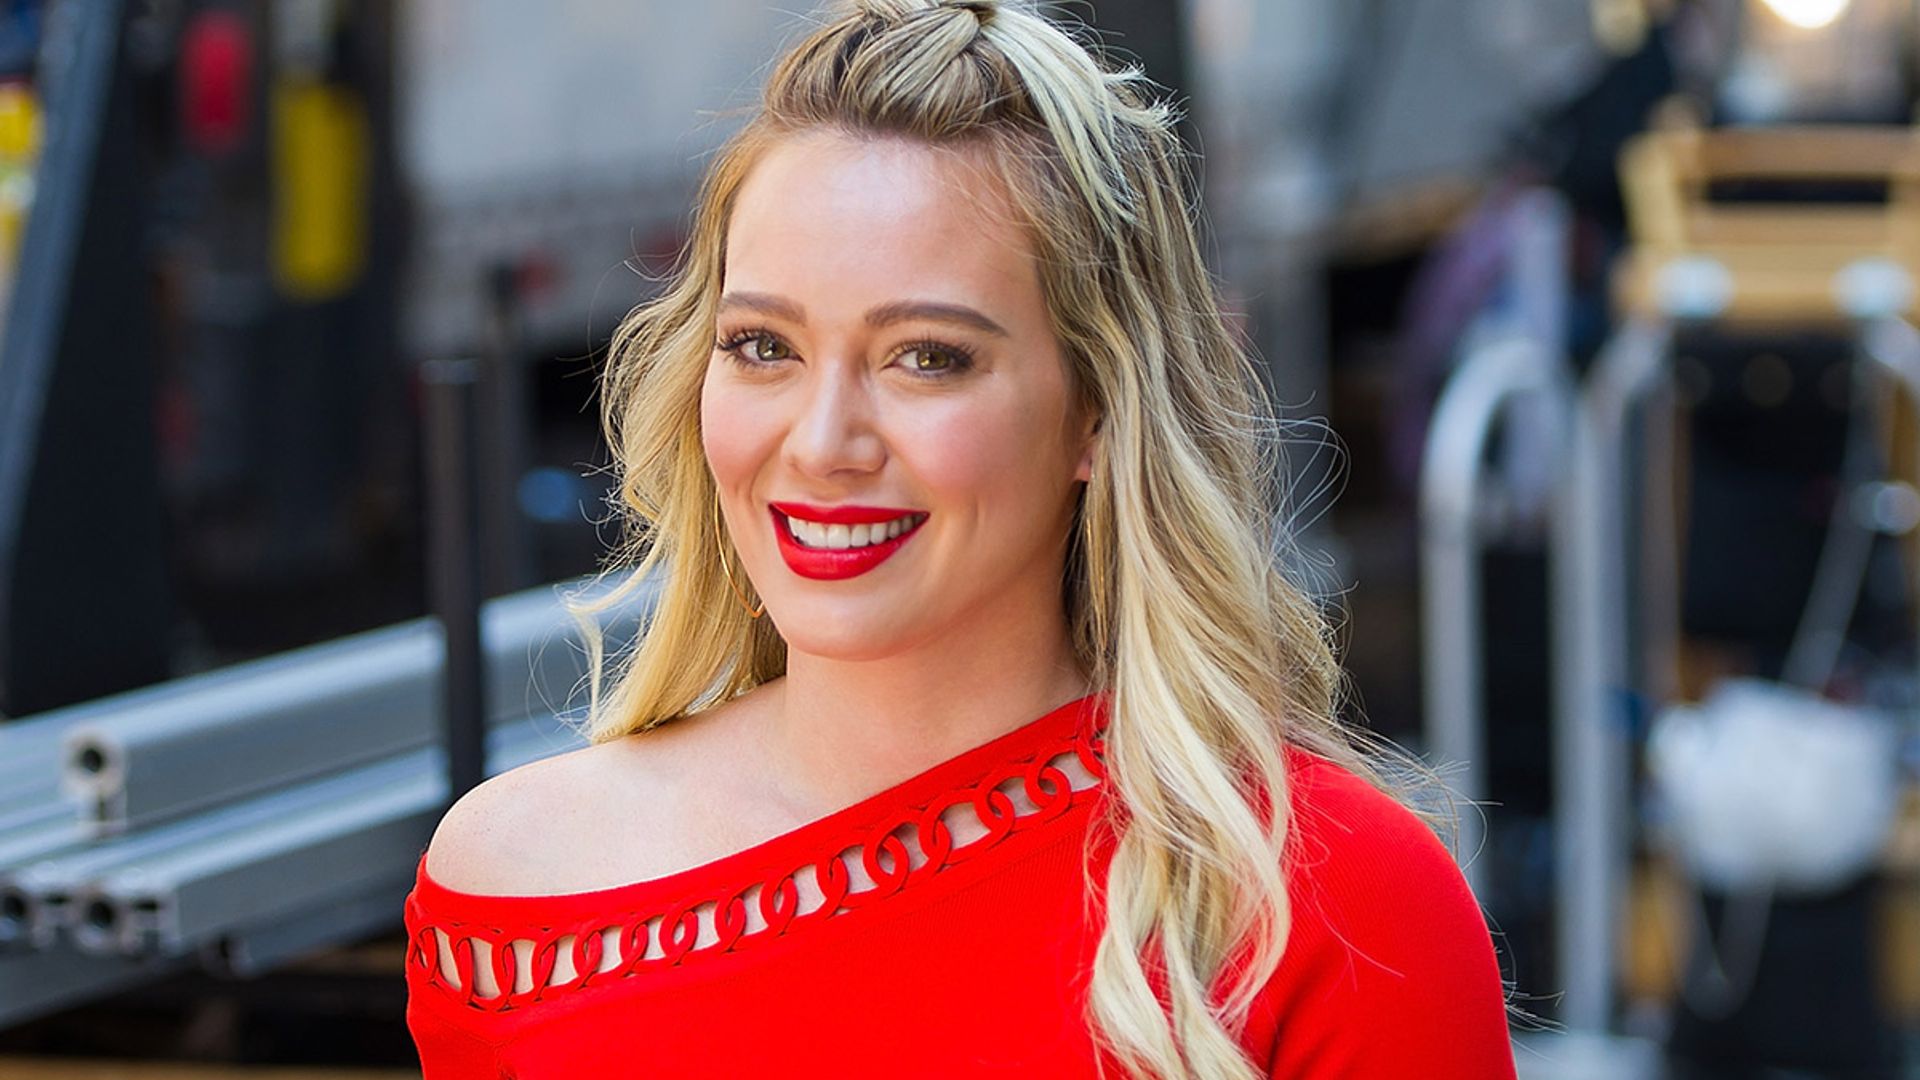 A new Lizzie McGuire series is coming to TV and Hilary Duff will star - details